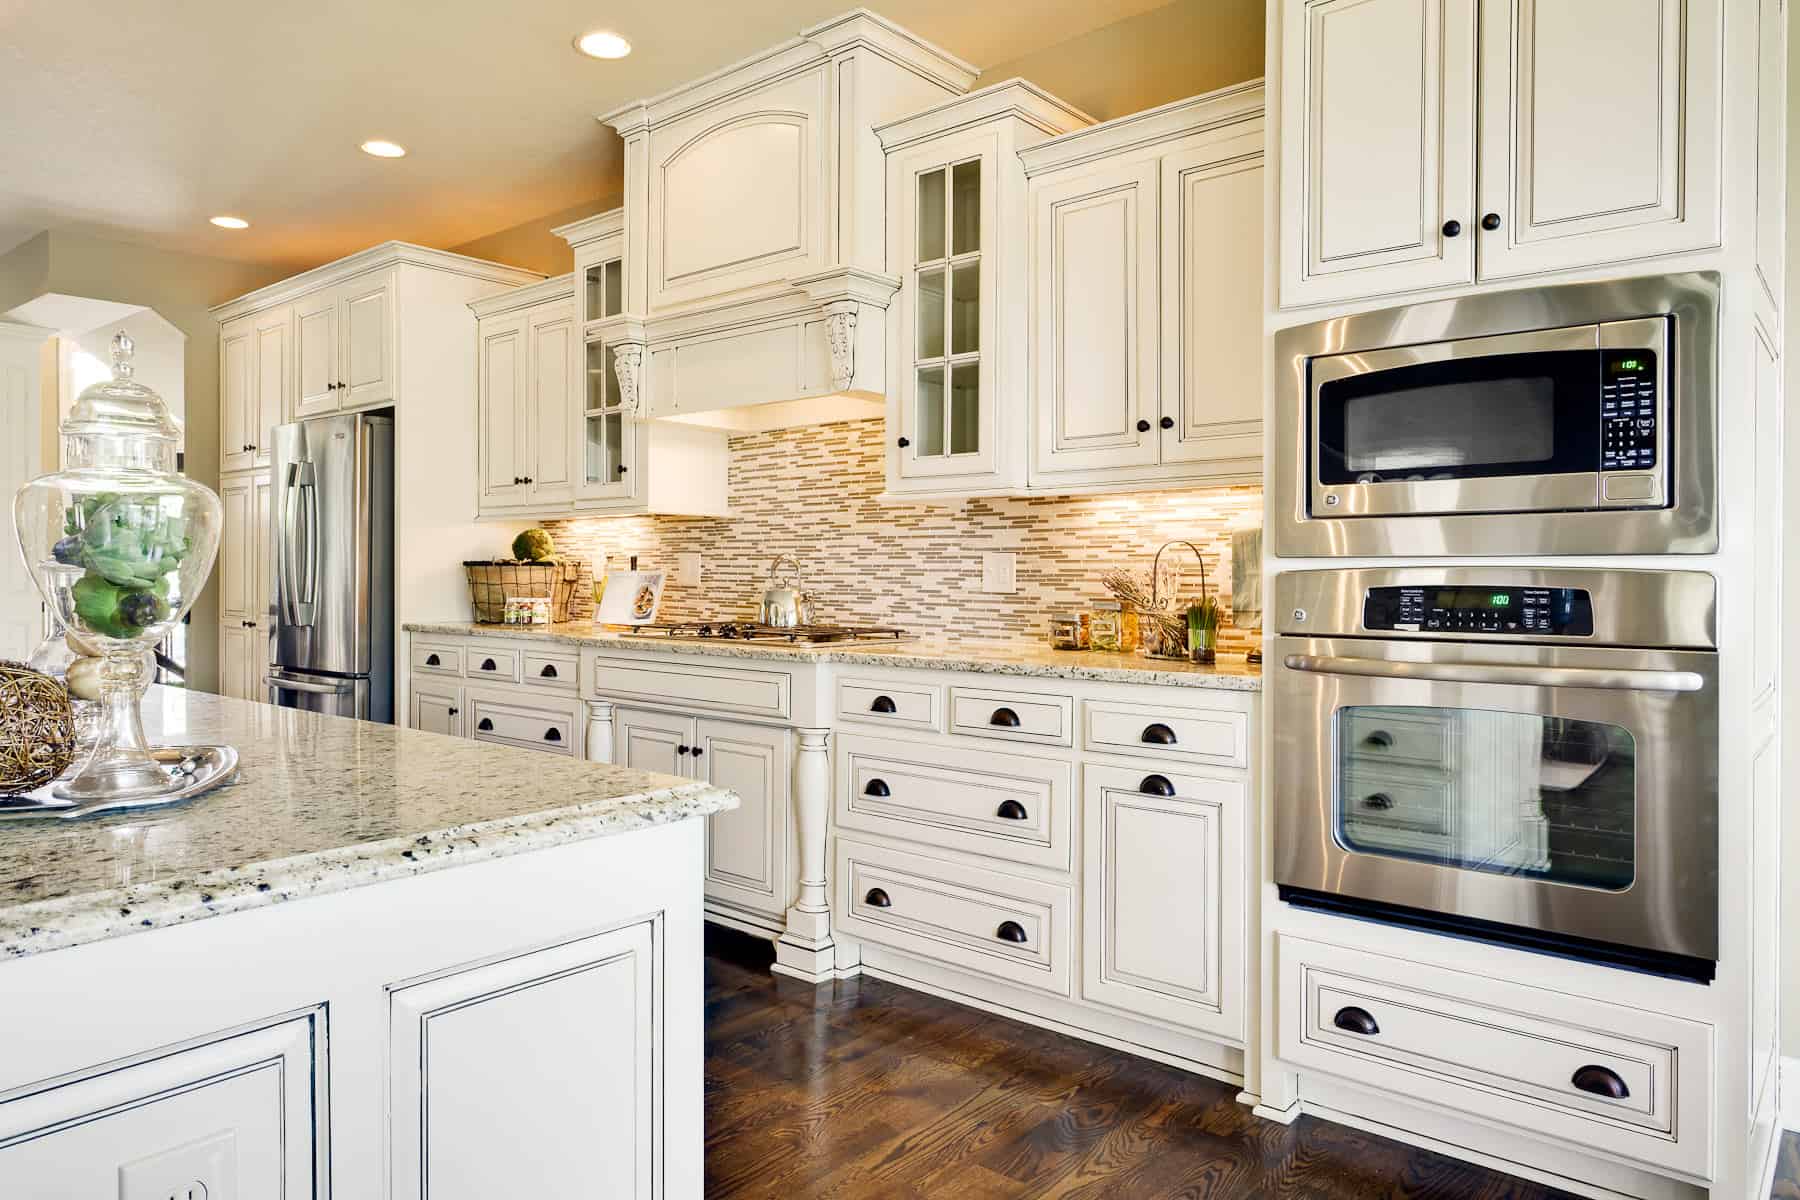 How much do Granite Countertops Cost? | CounterTop Guides